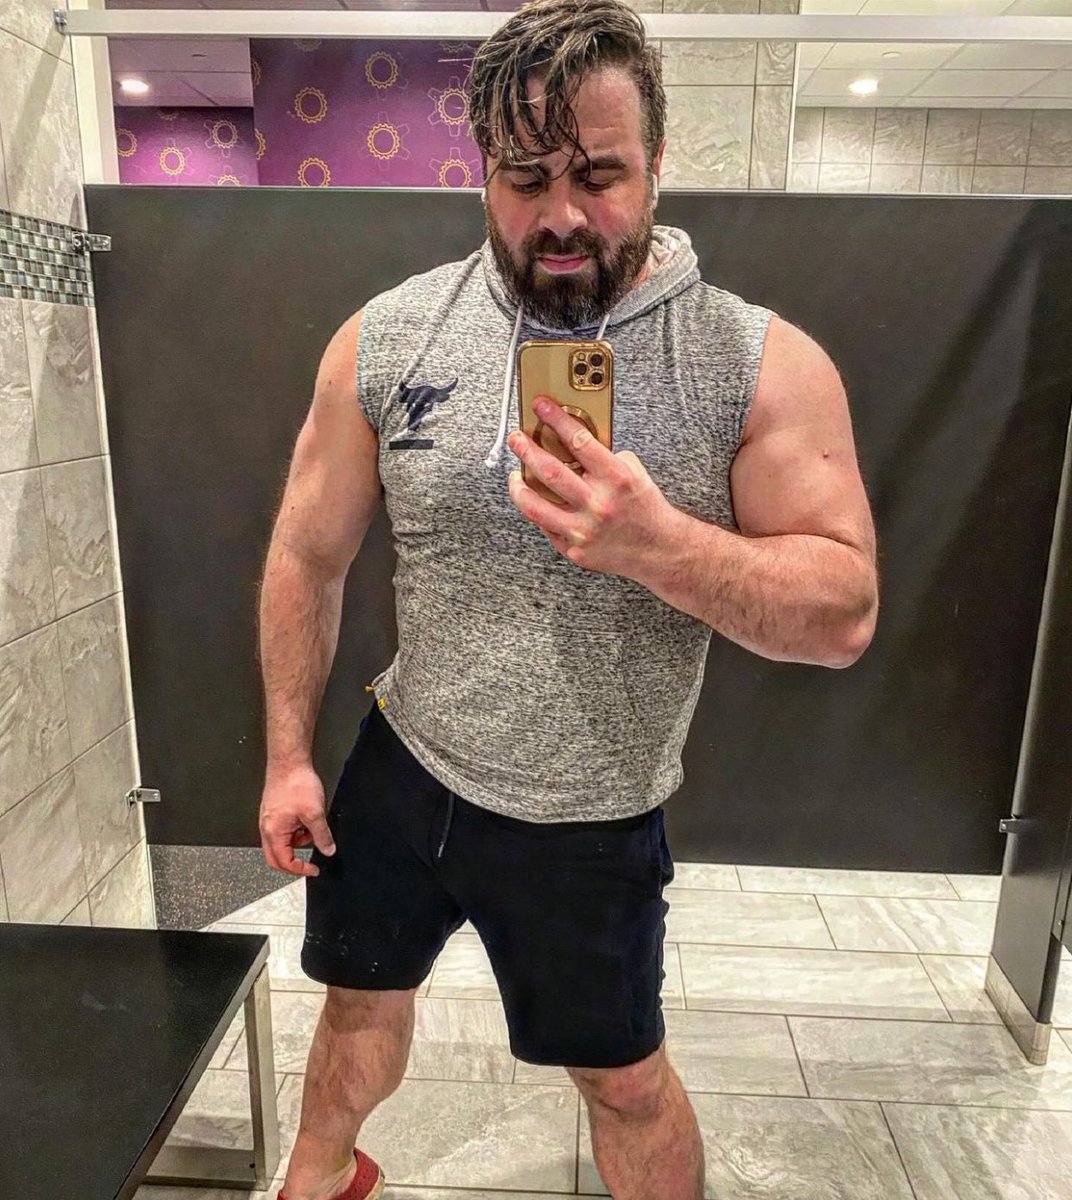 Triceps time

#gym #fitness #workout #running #motivation #bodybuilding #anime #fitnessmotivation #gymlife  #model #modeling #health #feet #intermittentfasting #findom #healthy #photography #crossfit #fitnessmodel #exercise #spinning #alpha #keto #weightlifting #weightloss